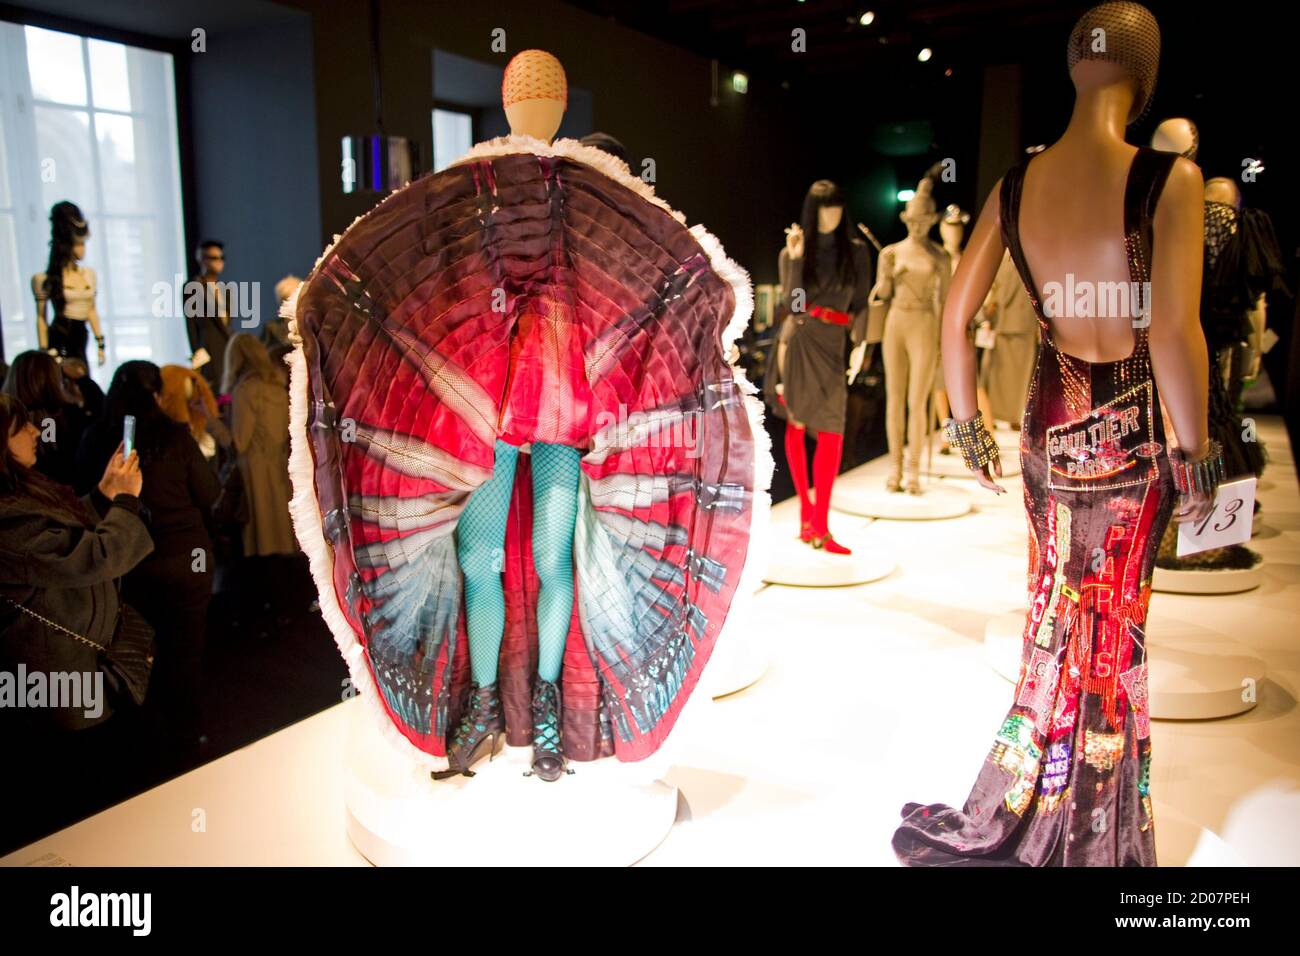 Mannequins displaying creations by designer Jean Paul Gaultier are seen  during the press visit of the Jean Paul Gaultier Exhibition at the Grand  Palais in Paris, March 30, 2015. The Jean Paul